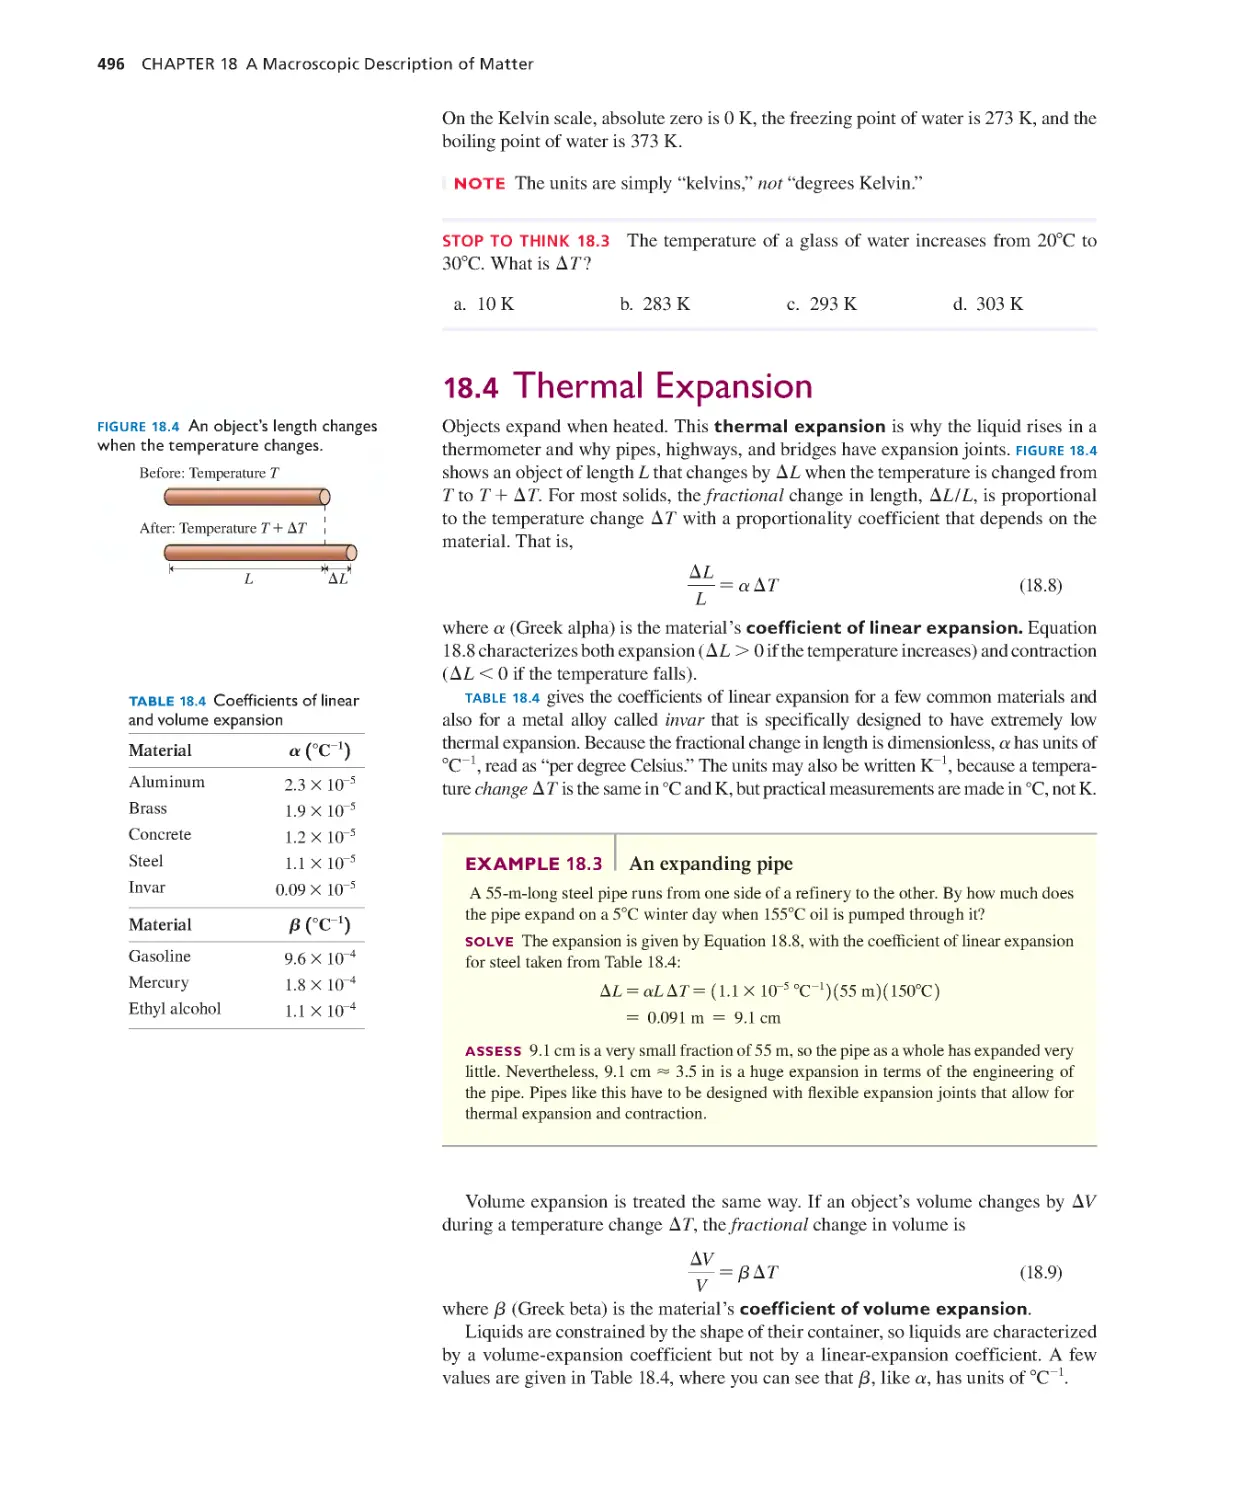 18.4. Thermal Expansion